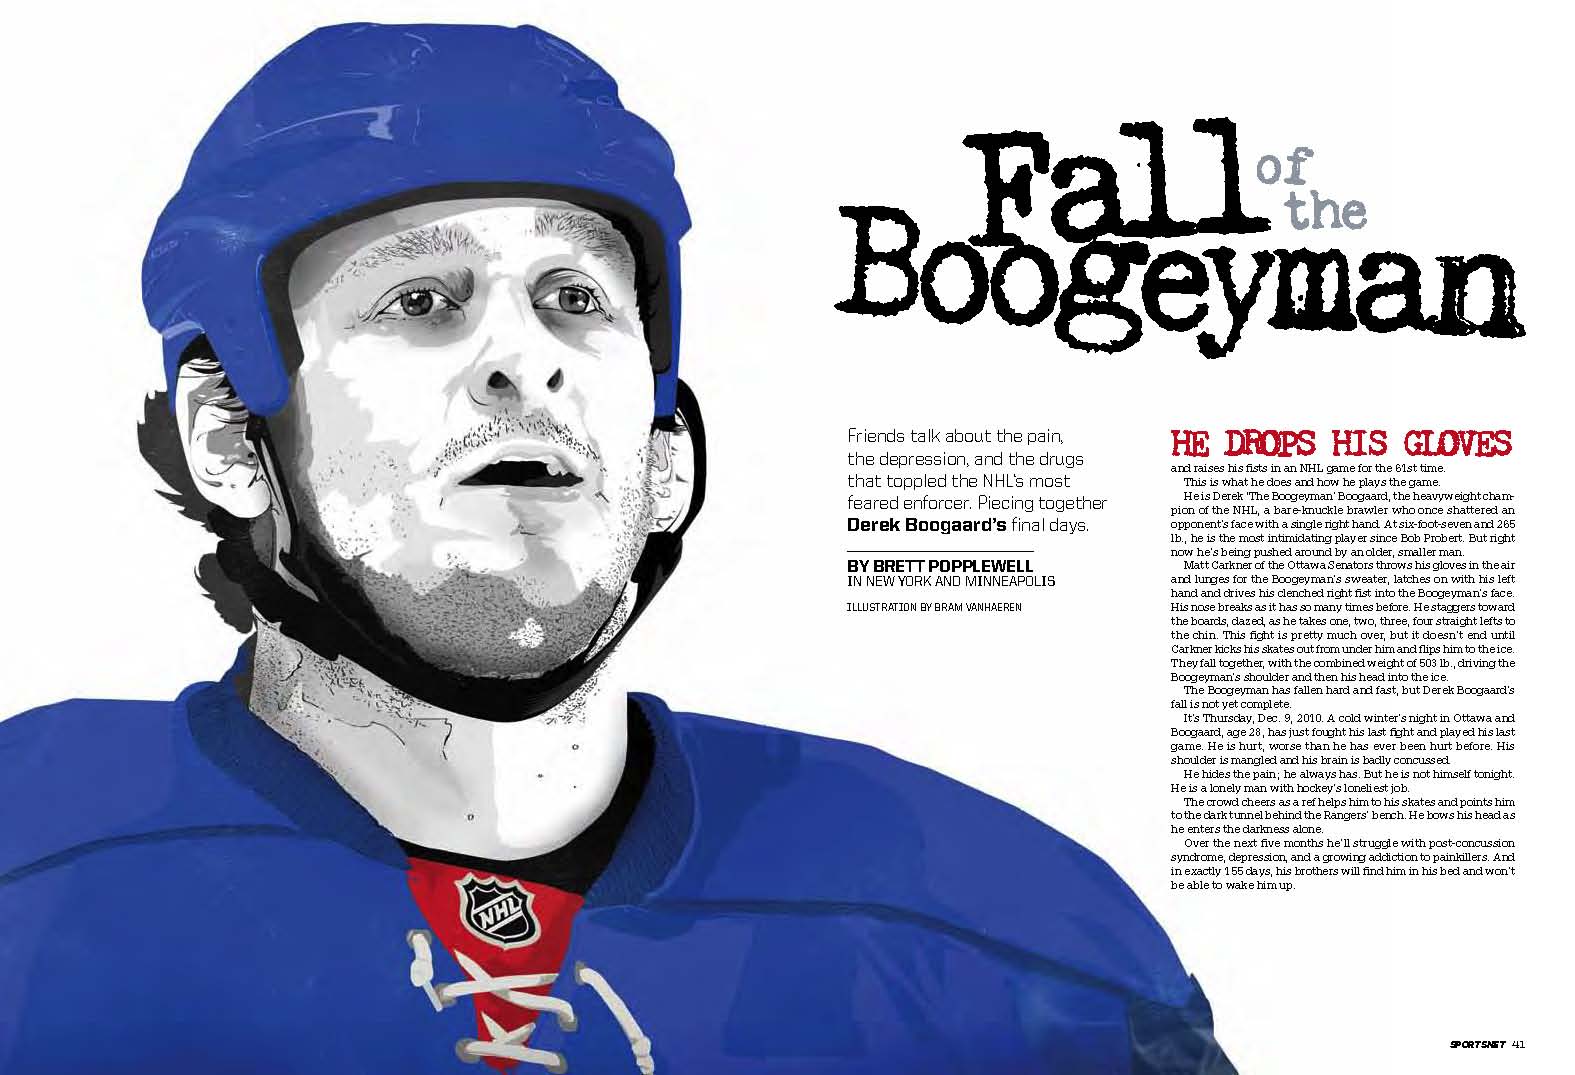 An interior spread from the first issue of Sportsnet Magazine